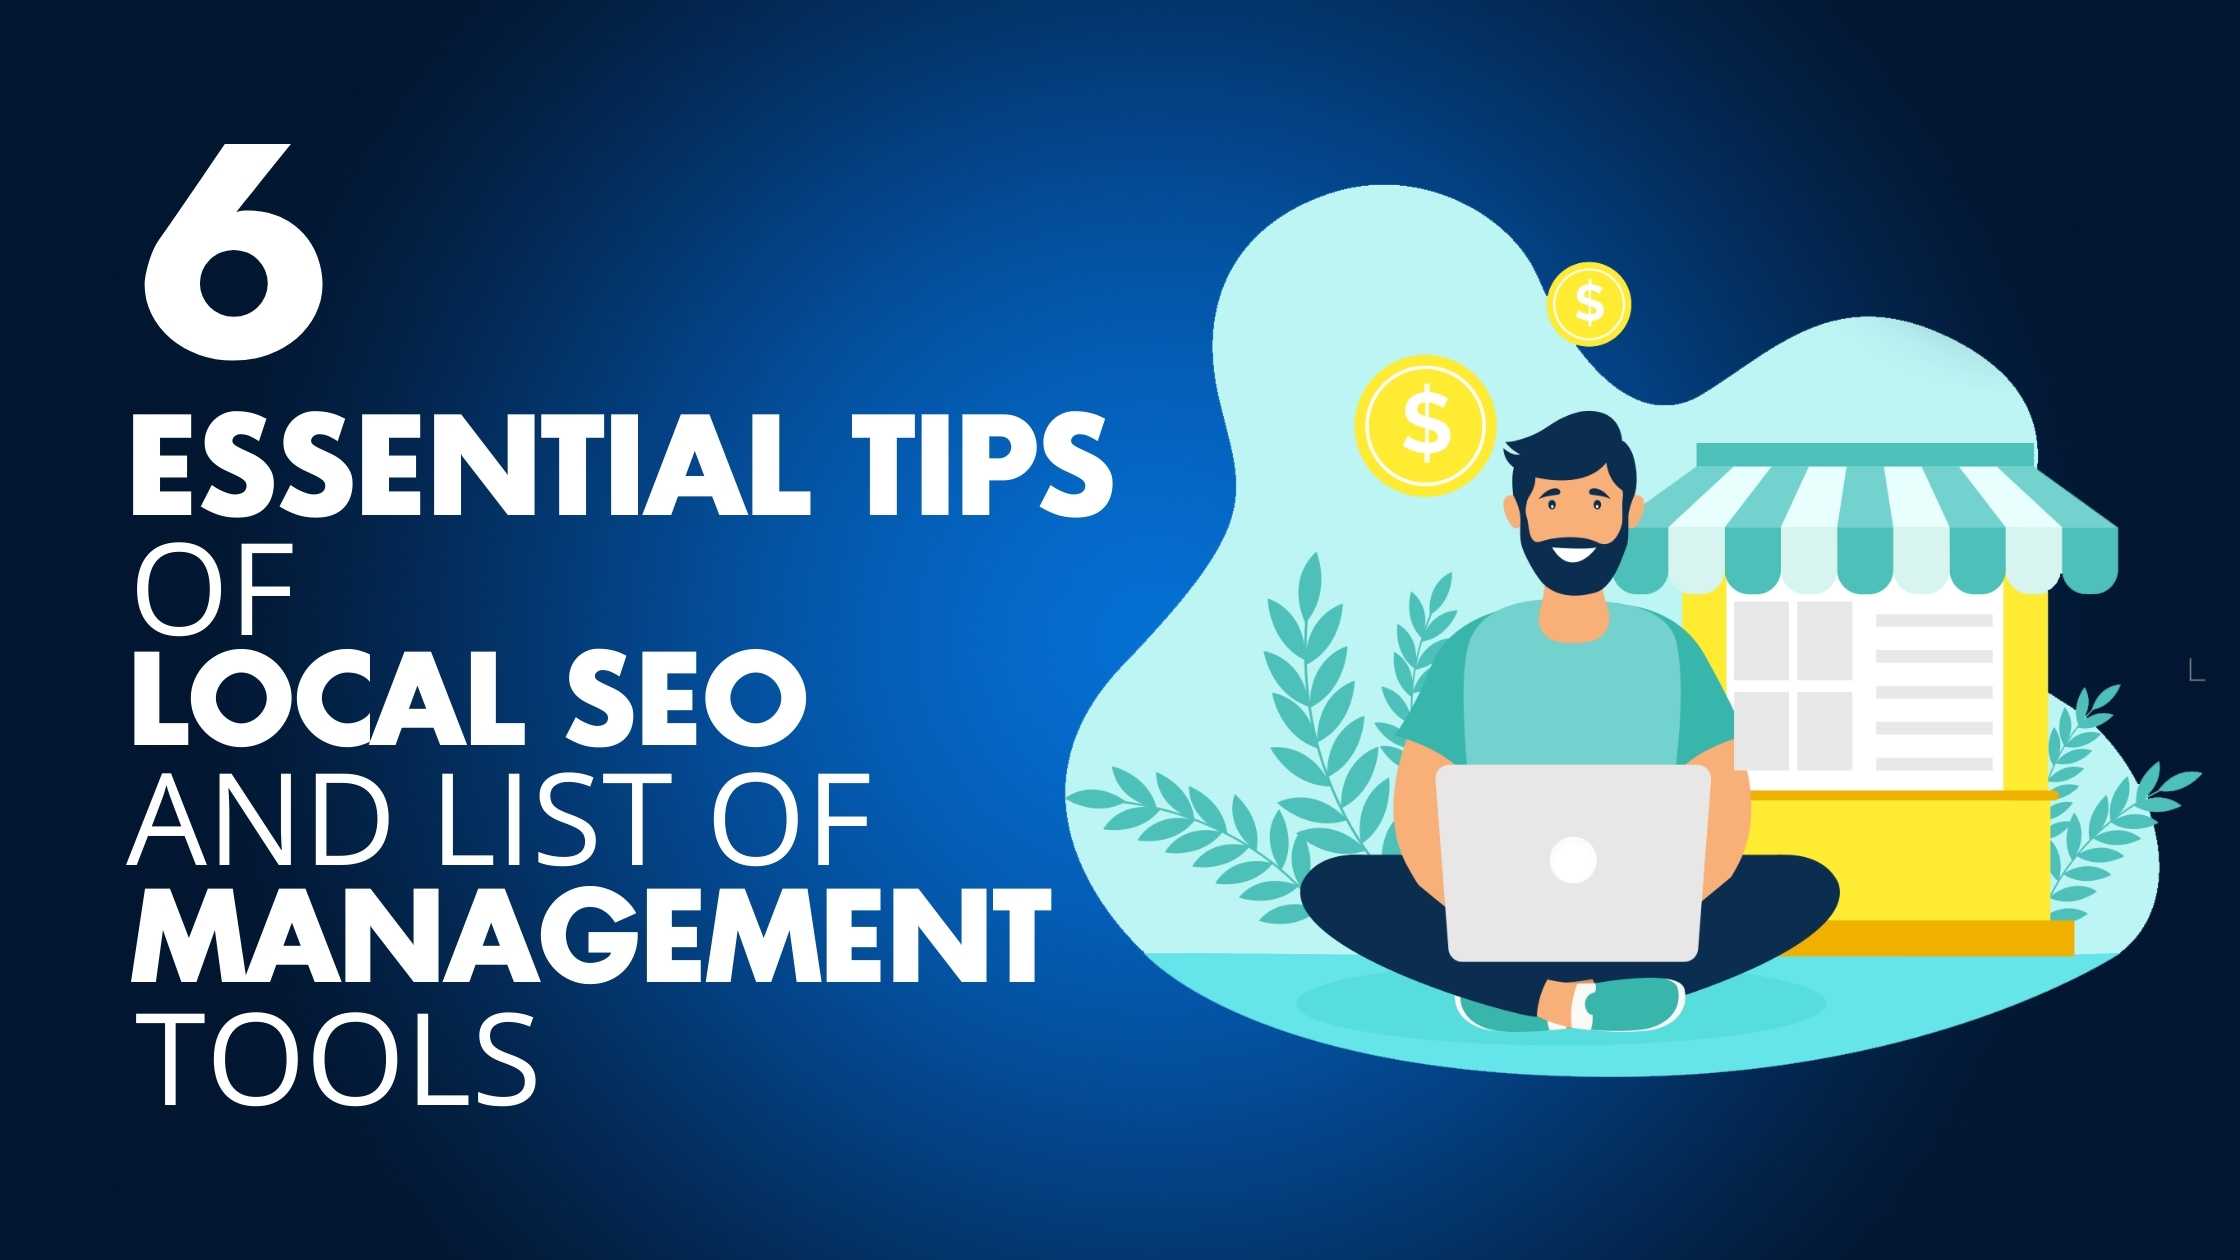 6 Essential Tips of Local SEO and List of Management Tools